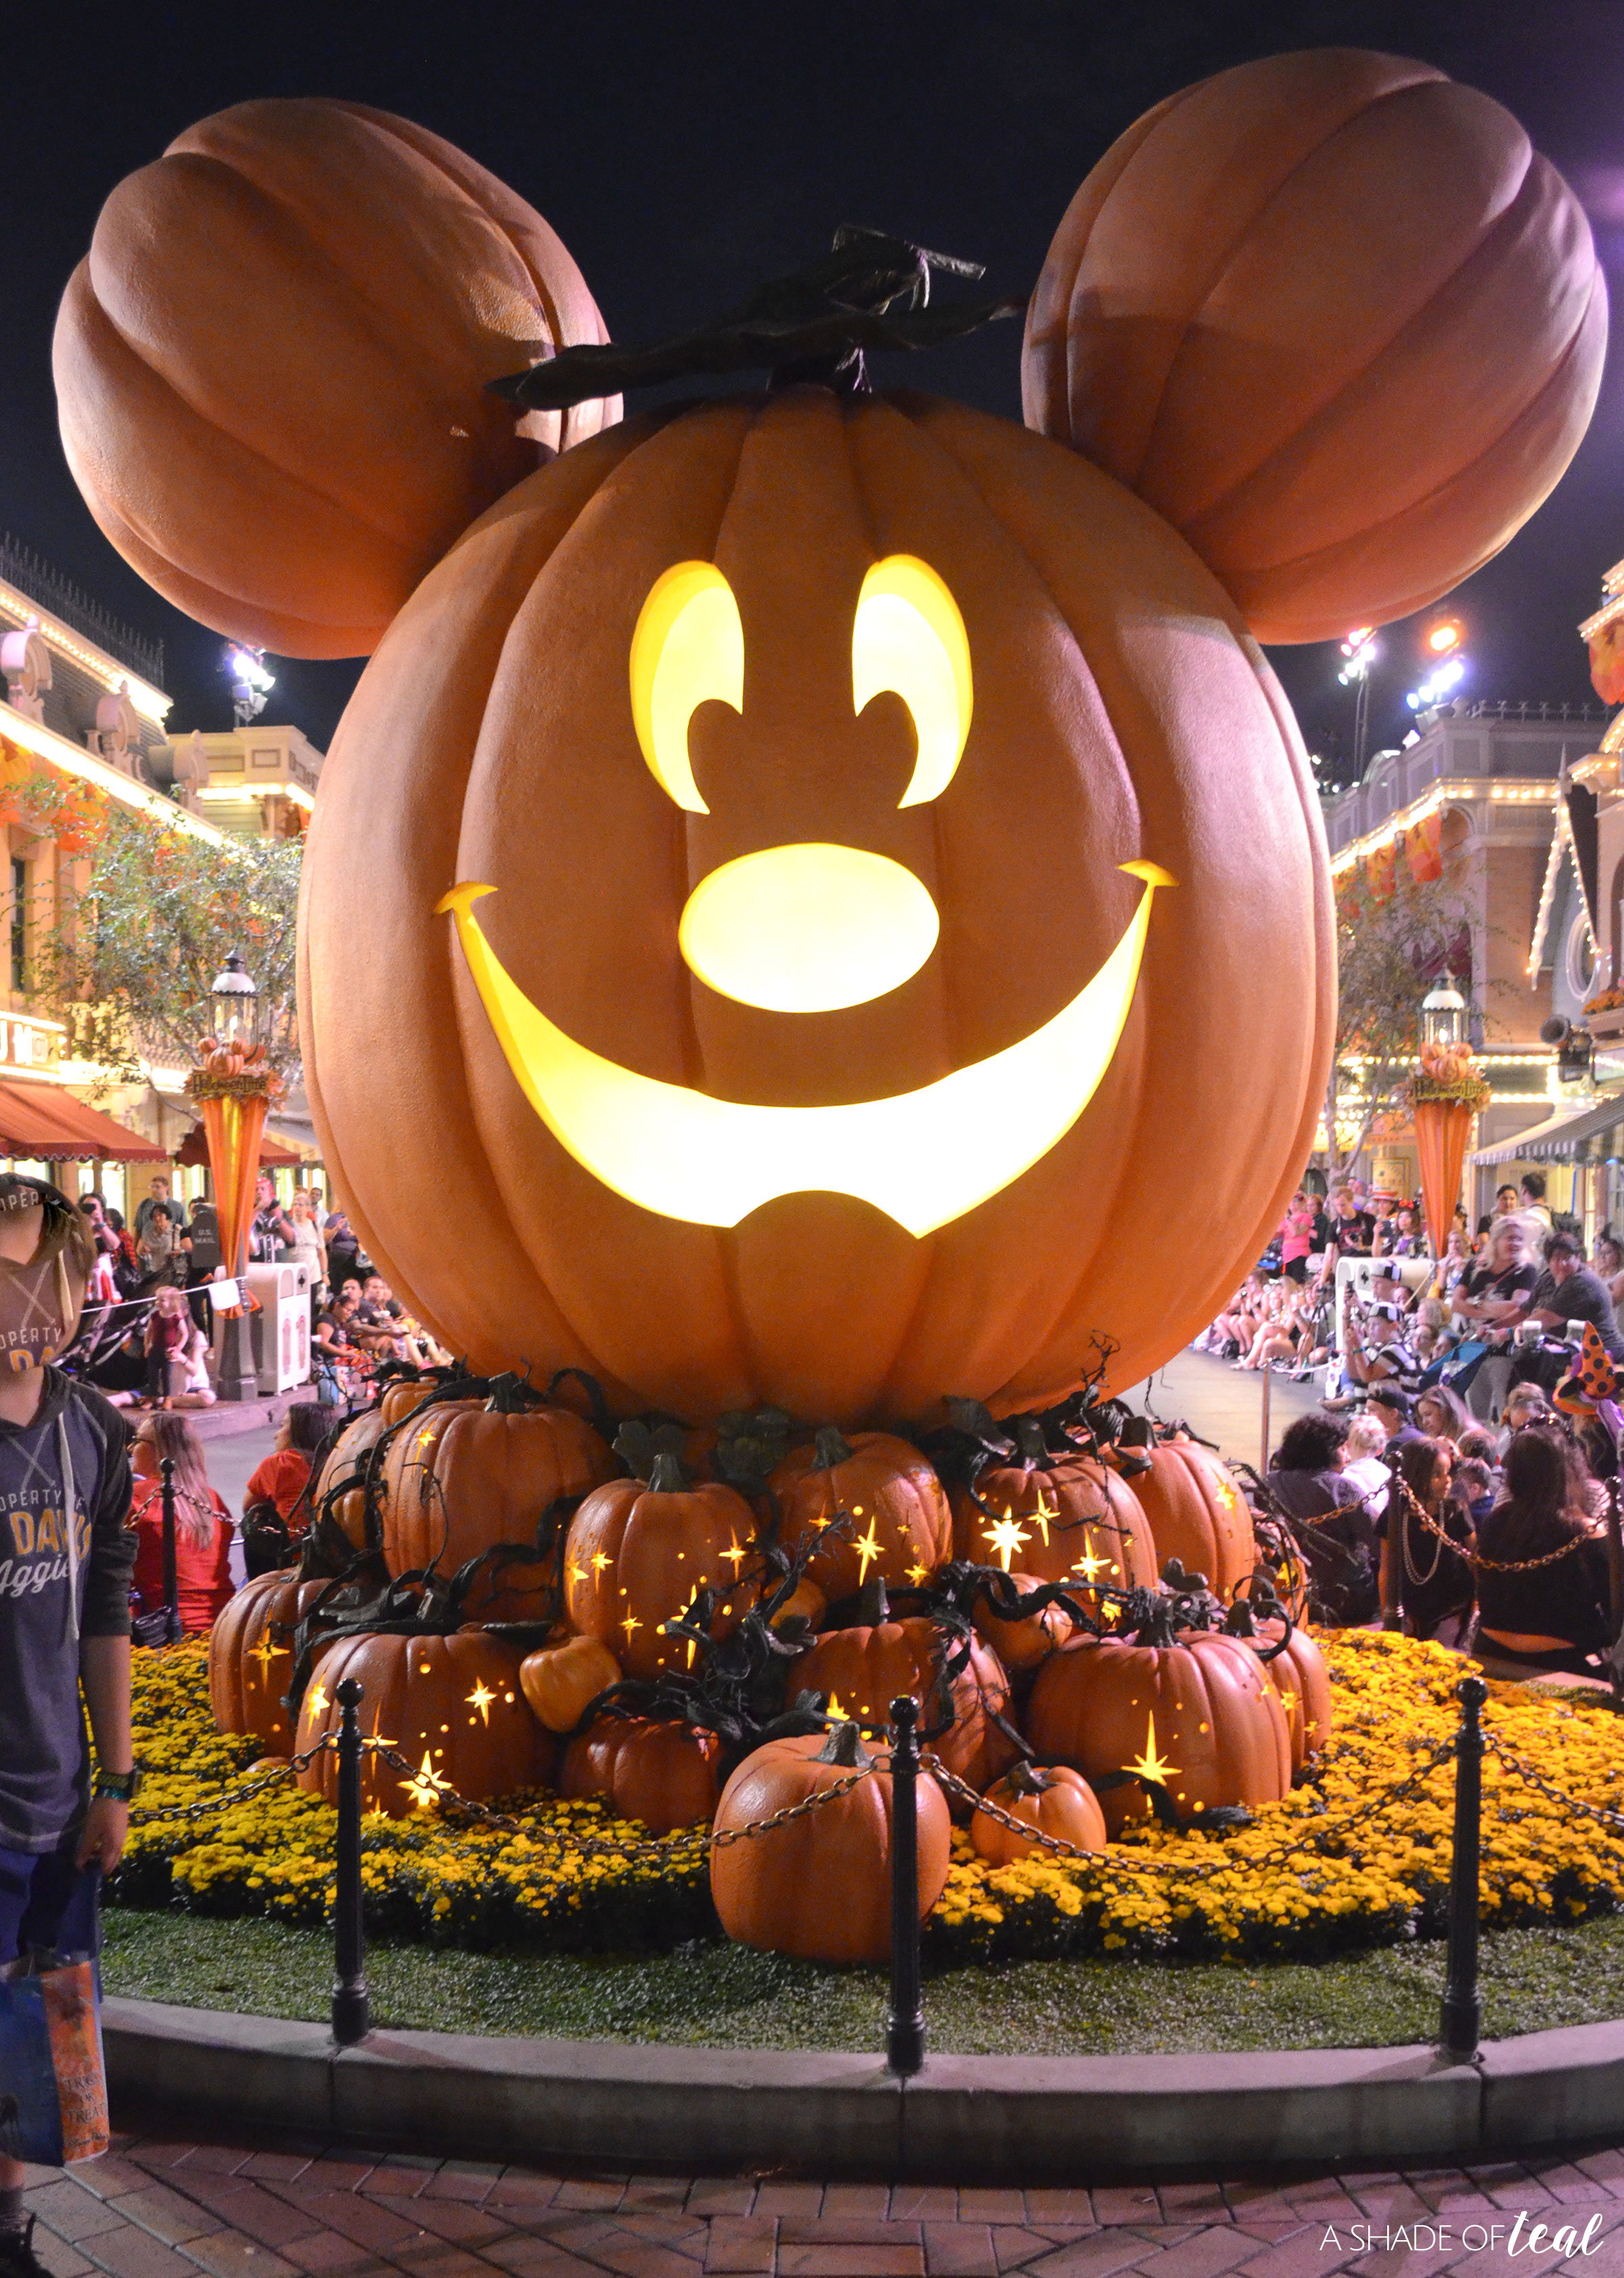 Bring Home the Magic of Disney with Halloween Decorations